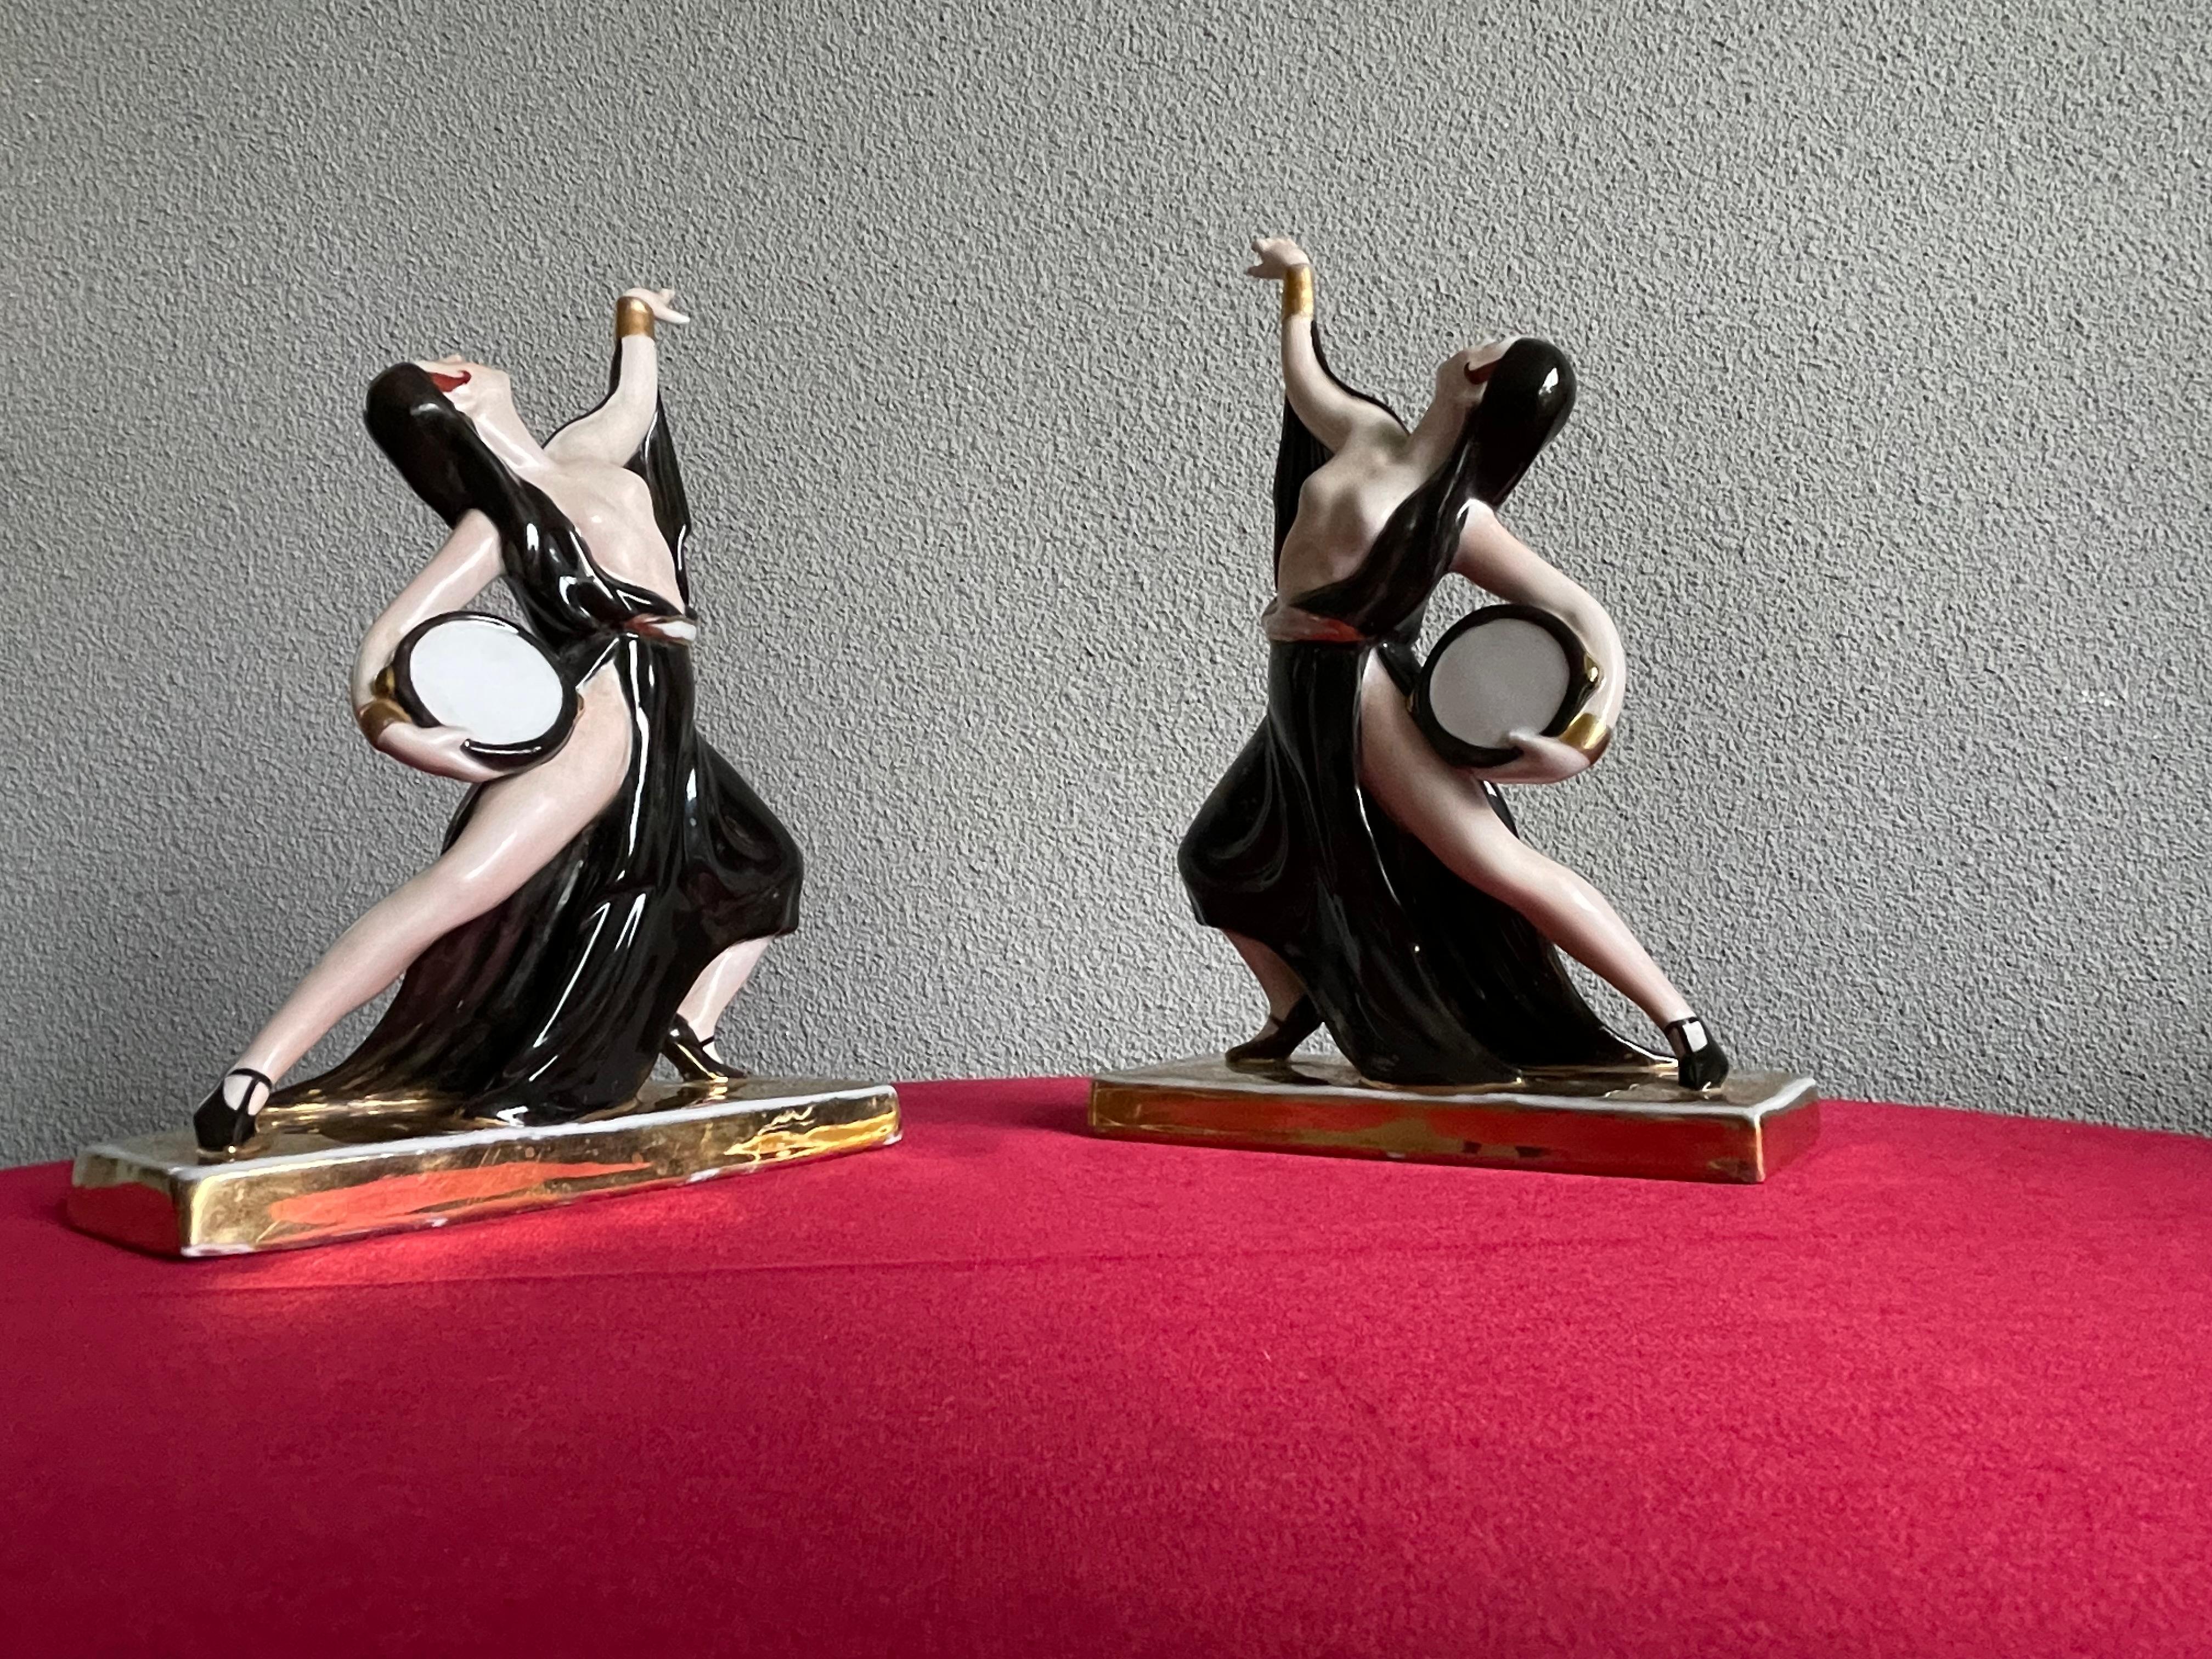 Rare & Stylish Pair of 1920s Porcelain French Art Deco Risque Dancer Bookends For Sale 7